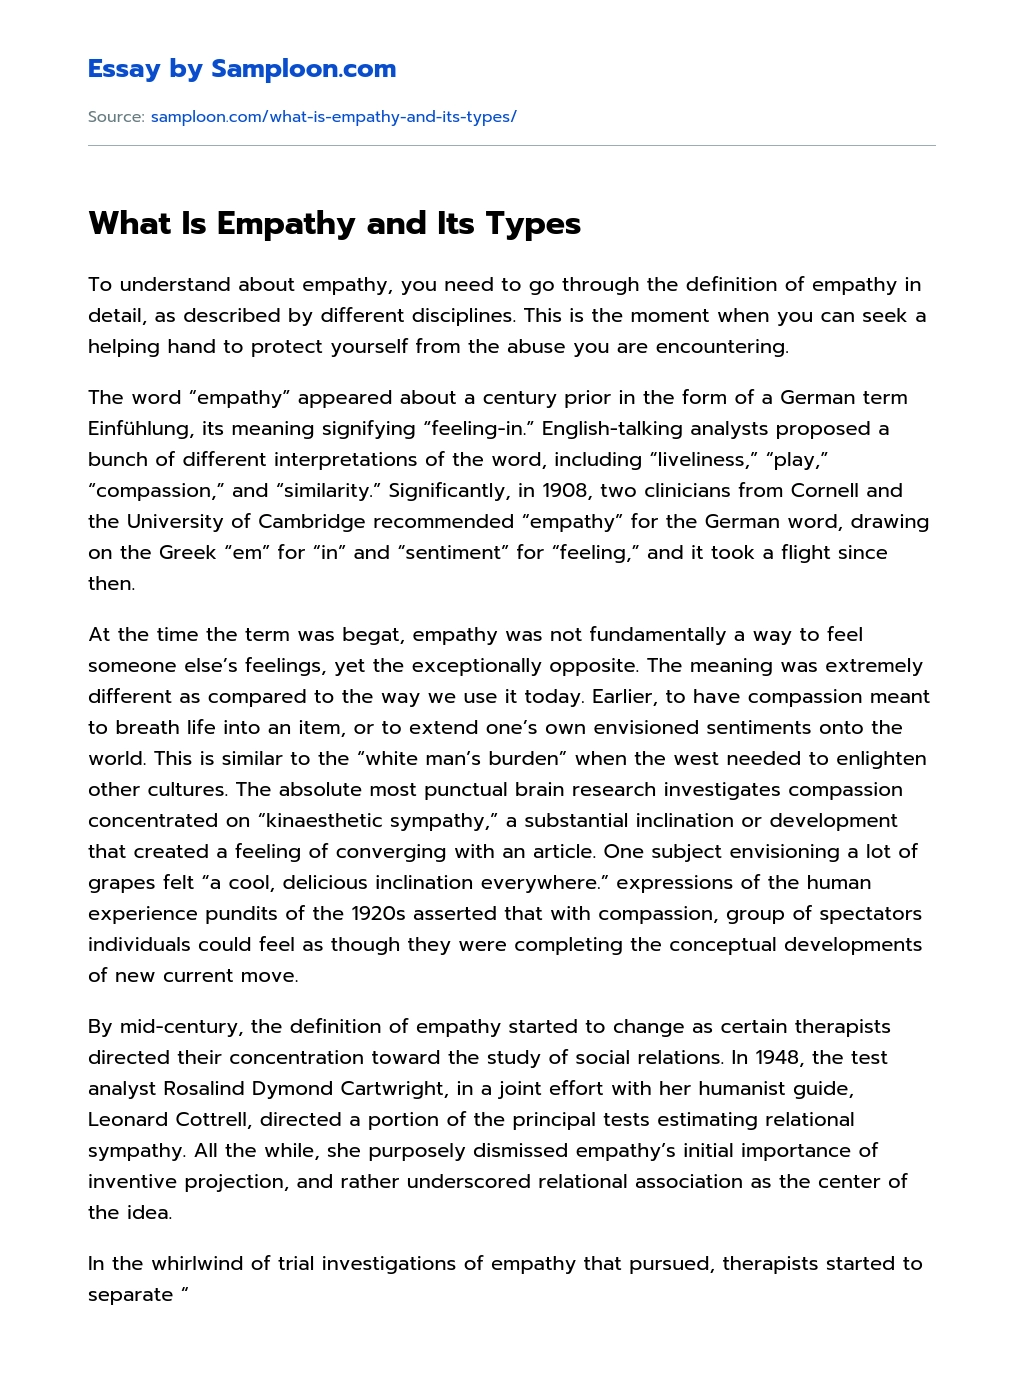 What Is Empathy and Its Types essay